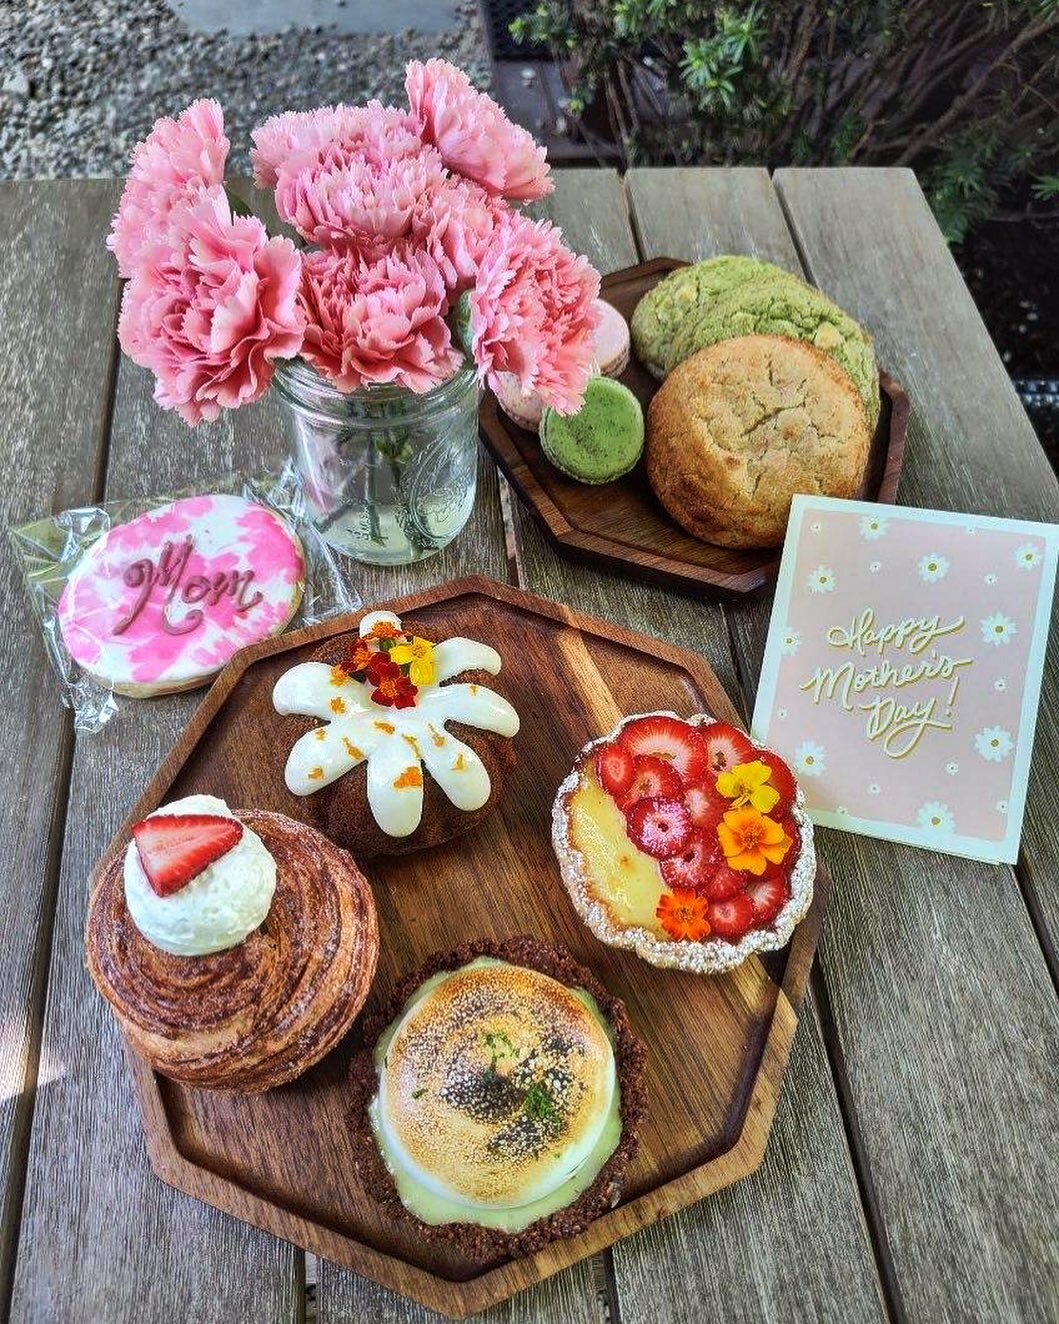 Mother&rsquo;s Day + Pink&amp;Green Bundle 
💗💚💐
This weekend only!  @behindthebookstore fruit tarts and macarons